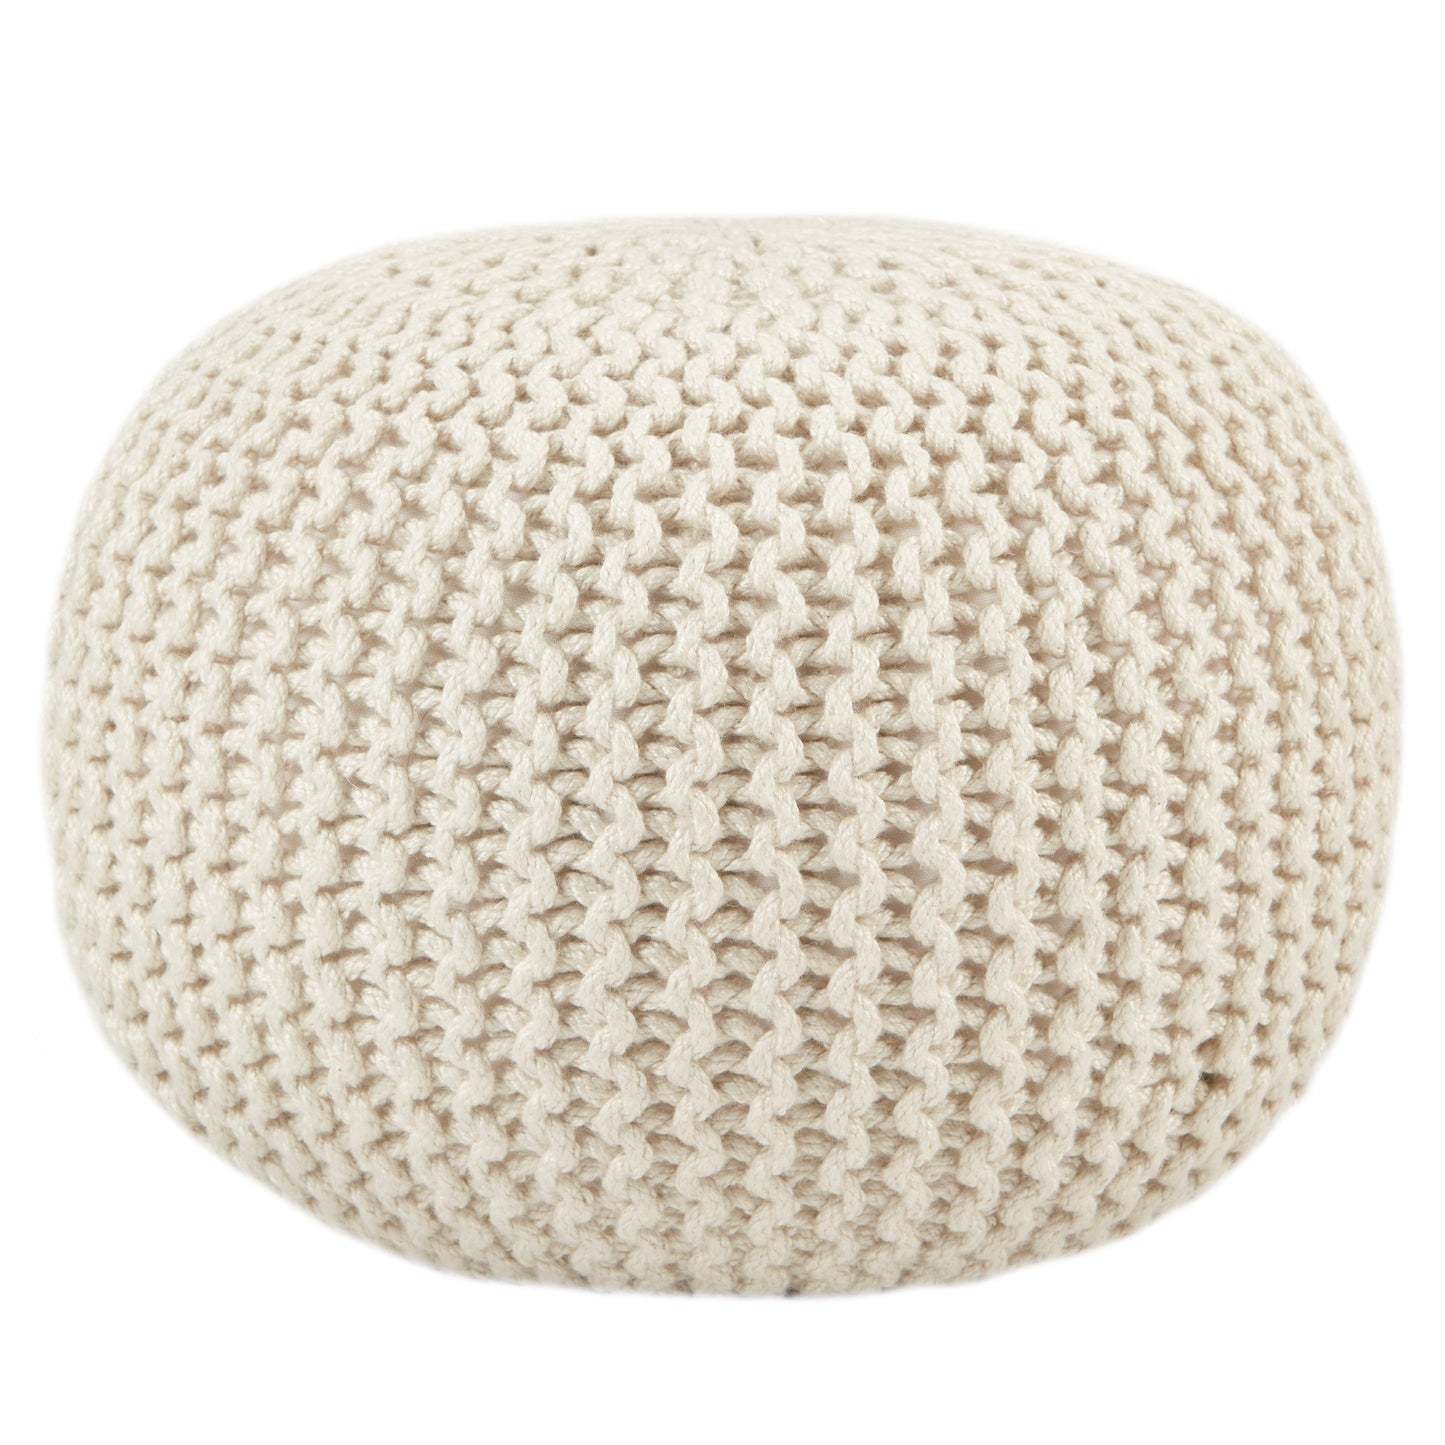 Spectrum Rays Asilah Handmade Synthetic Blend Outdoor Pouf From Vibe by Jaipur Living